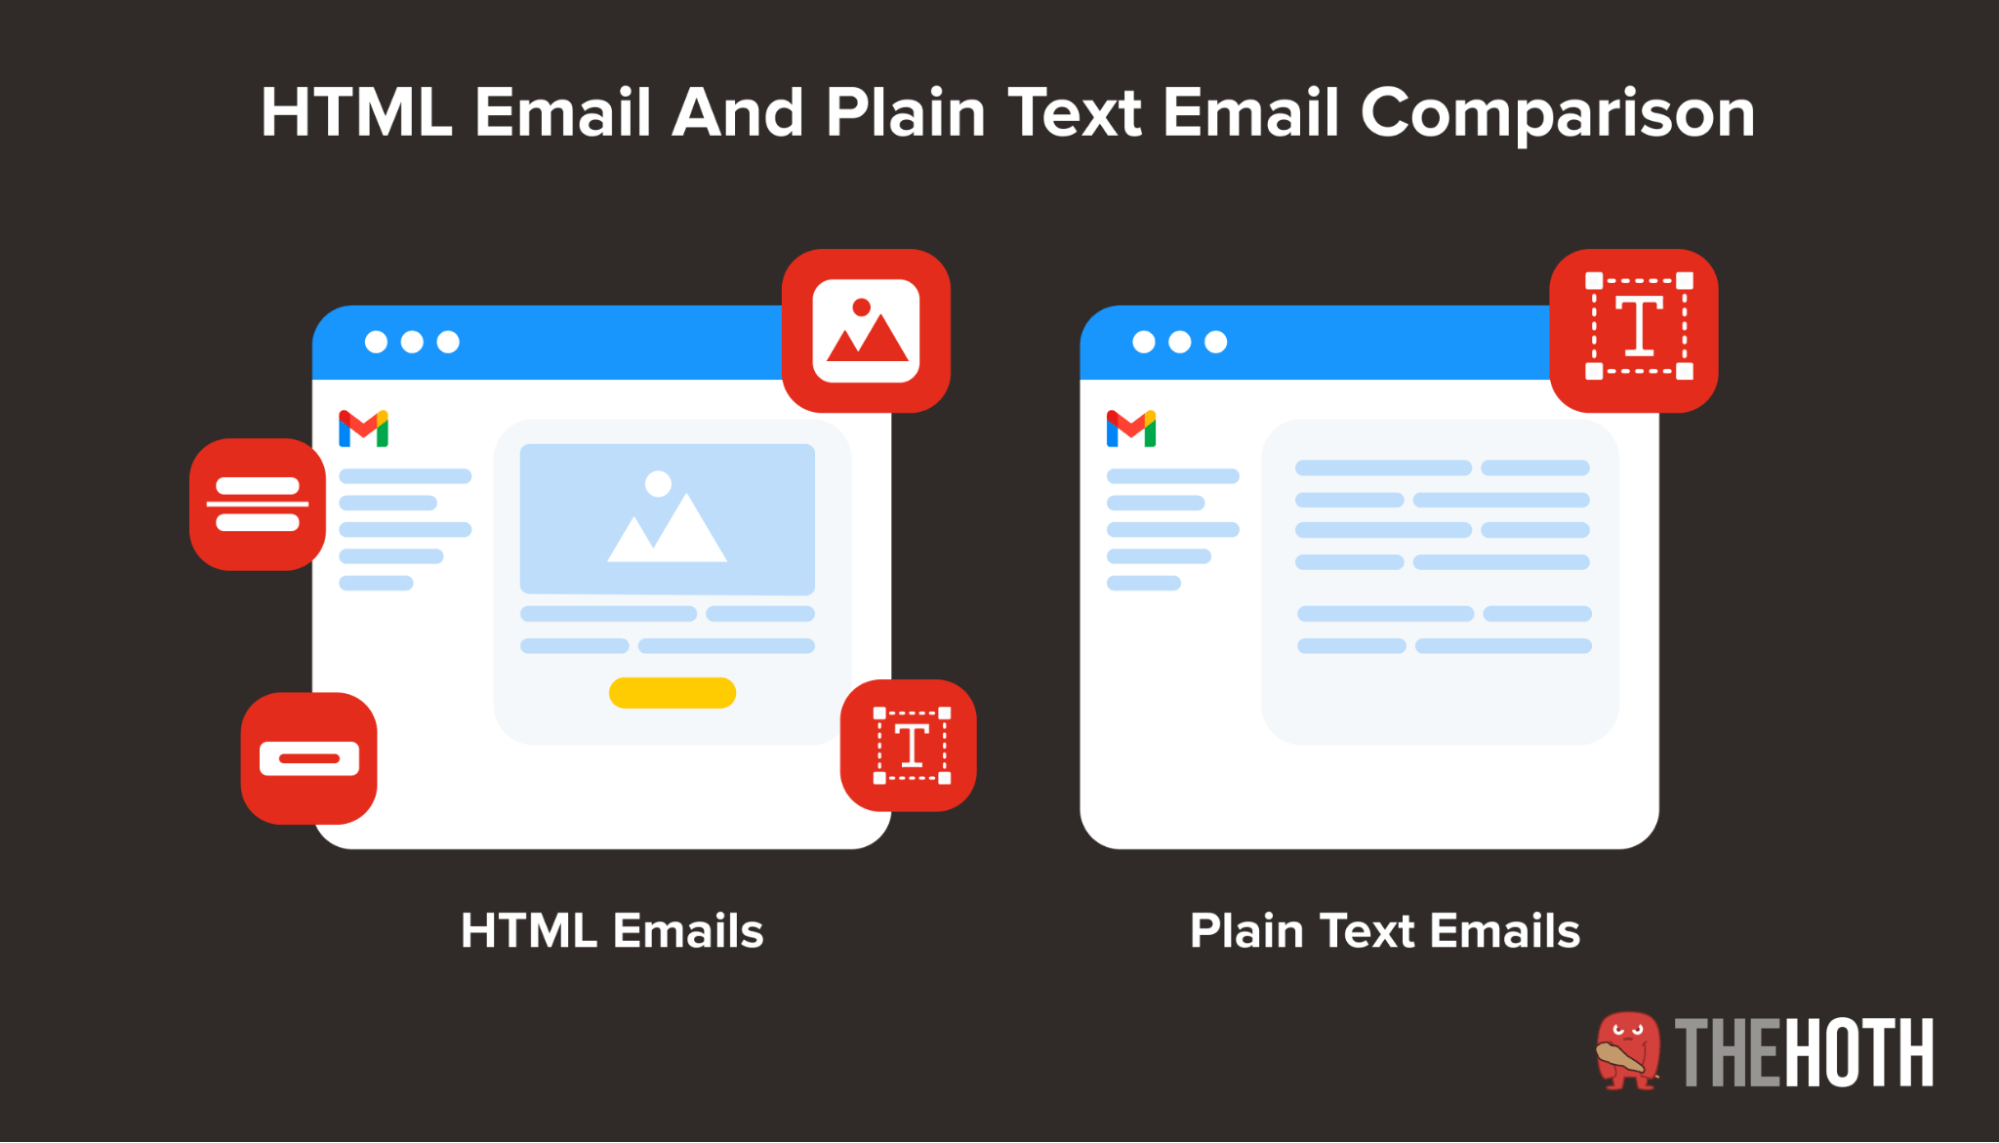 HTML Email vs. Plain Text Email